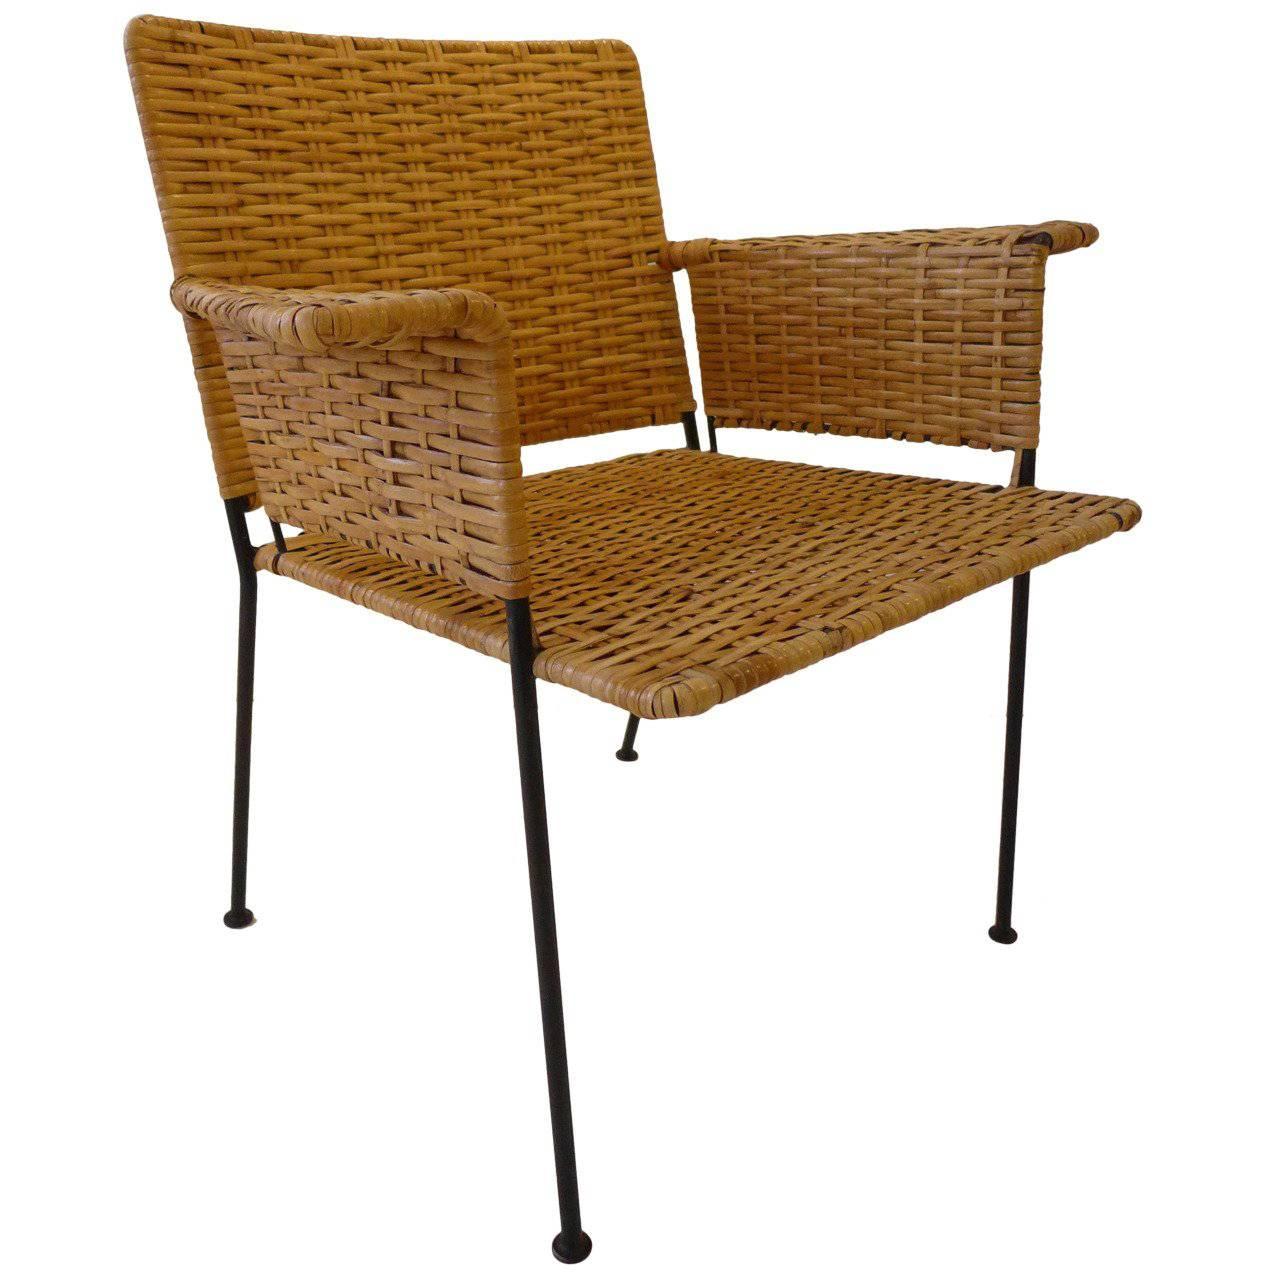 Van Keppel-Green Chair in Wrought Iron and Rattan